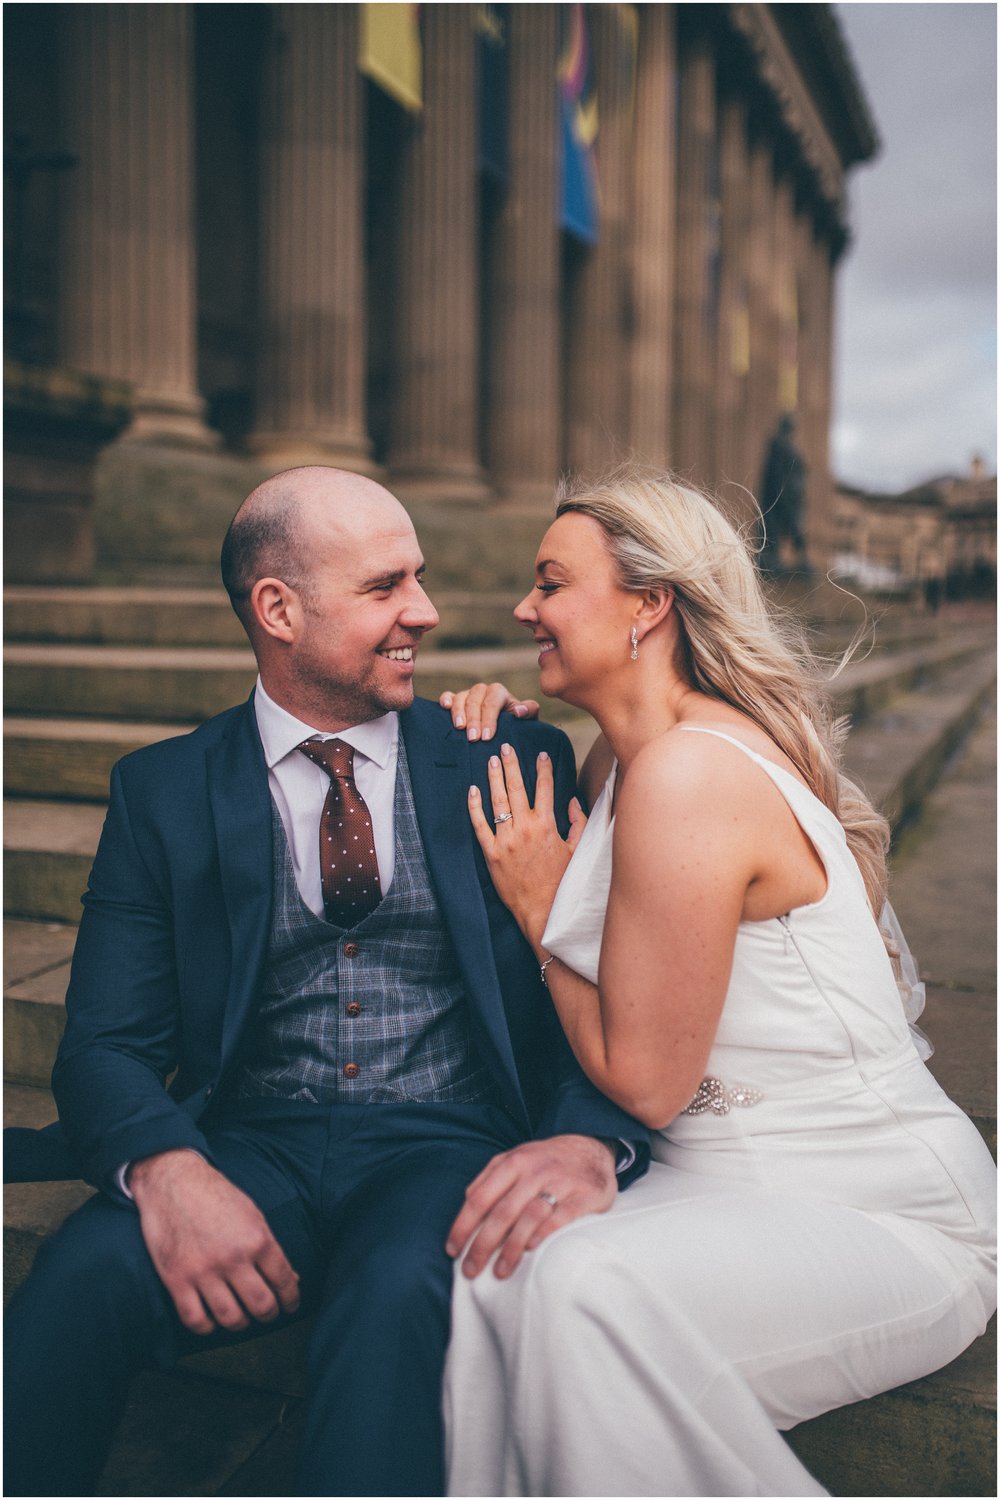 Bride and groom have their wedding portraits taken after their elopement Bride and groom get married in their elopement Bride and Groom elope in Liverpool city centre at St George's Hall in Liverpool